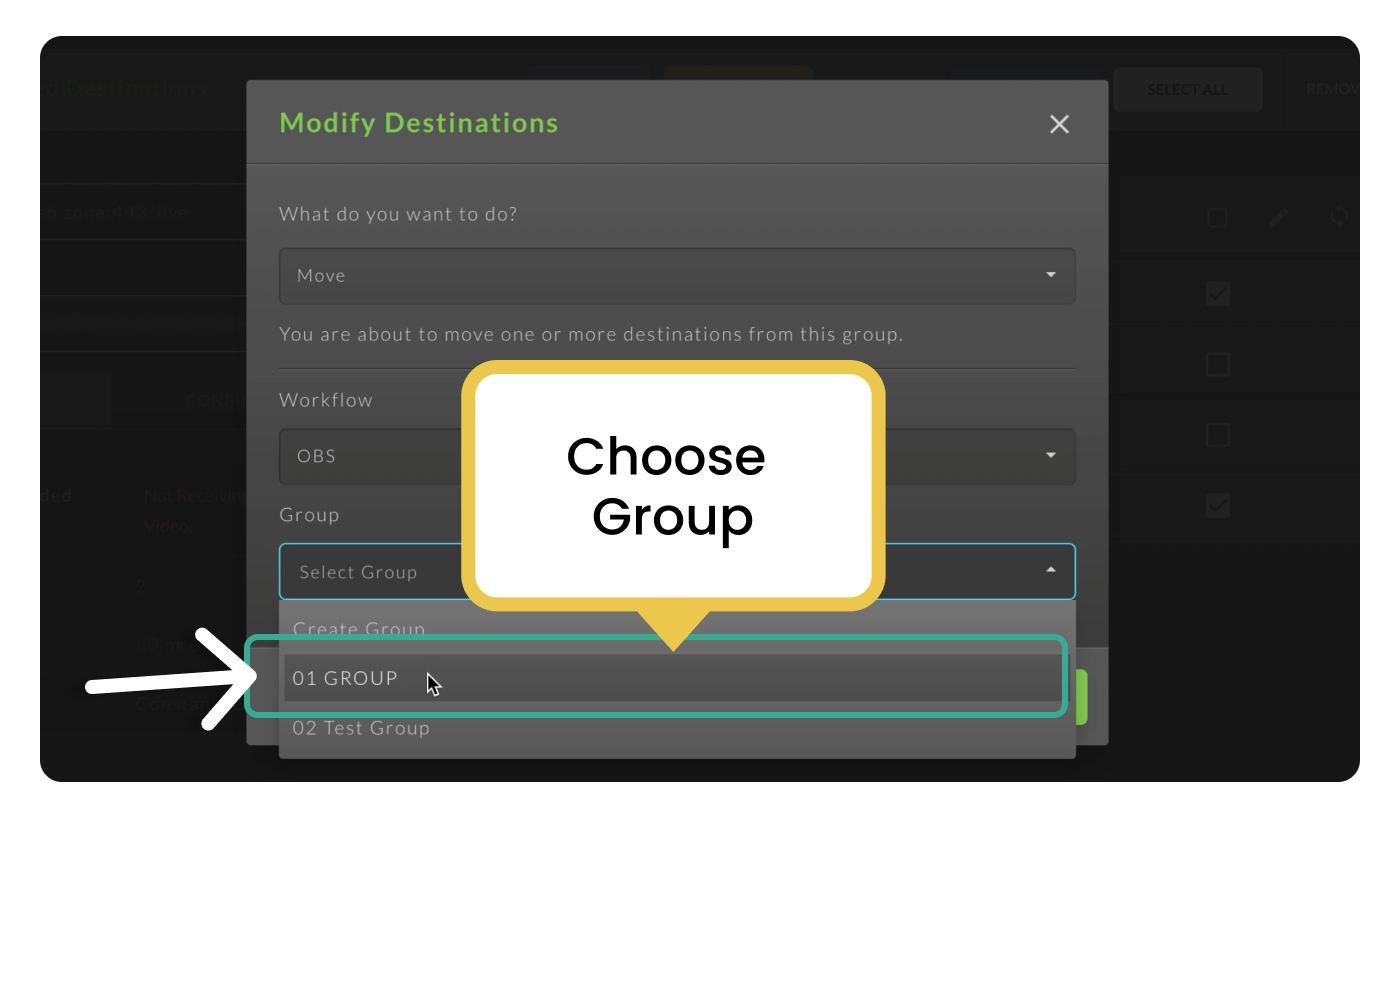 Movedestination-btwn-workflows-switchboardlive-howto 8.png